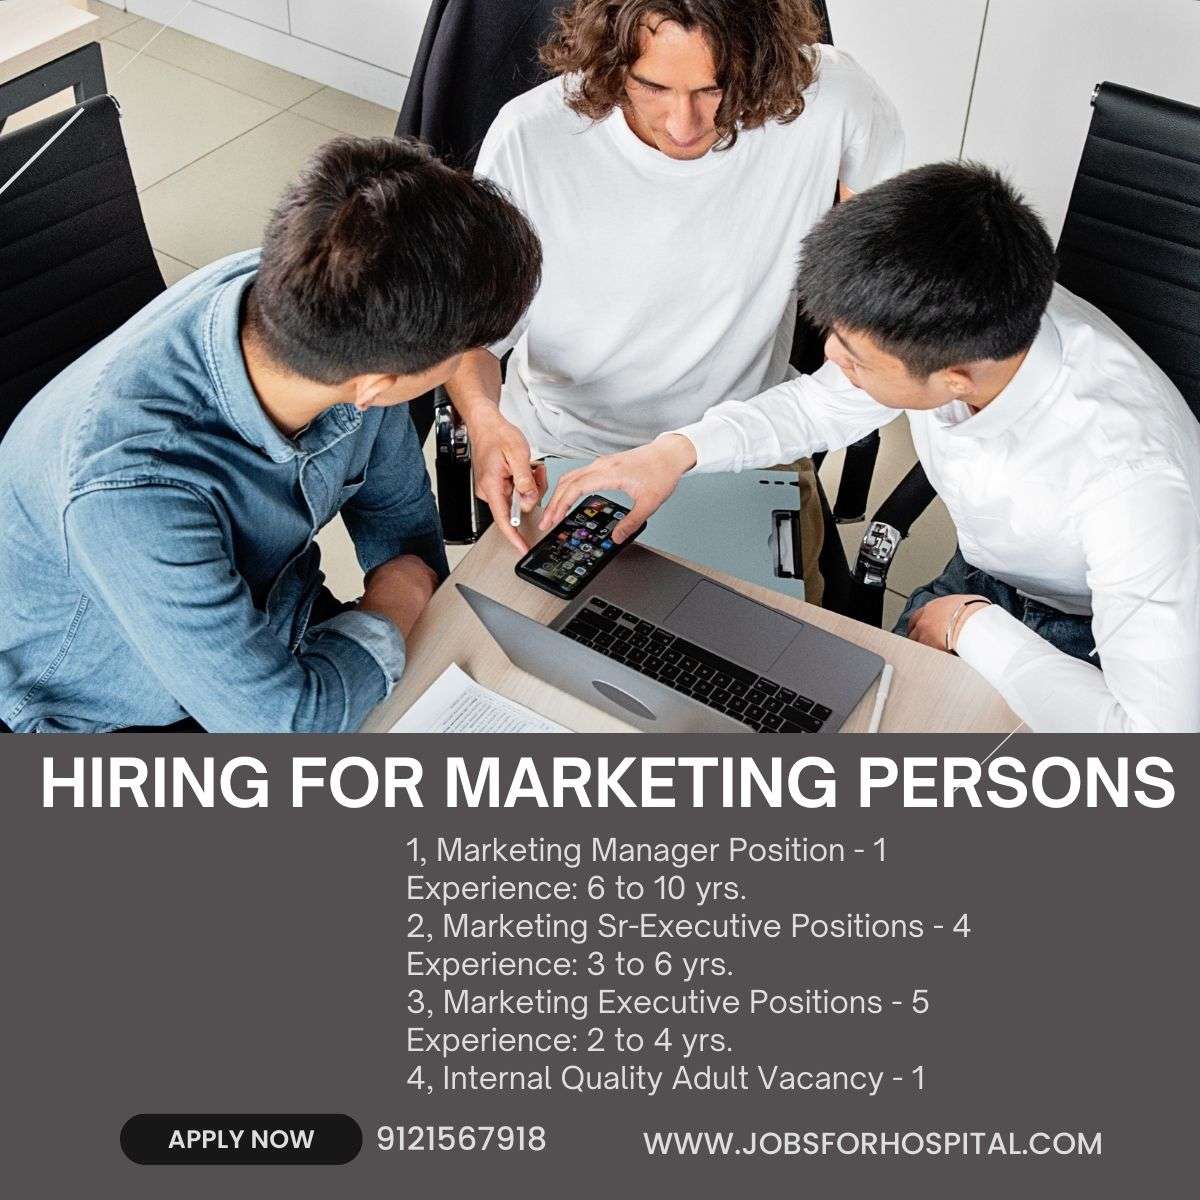 HIRING FOR MARKETING PERSONS